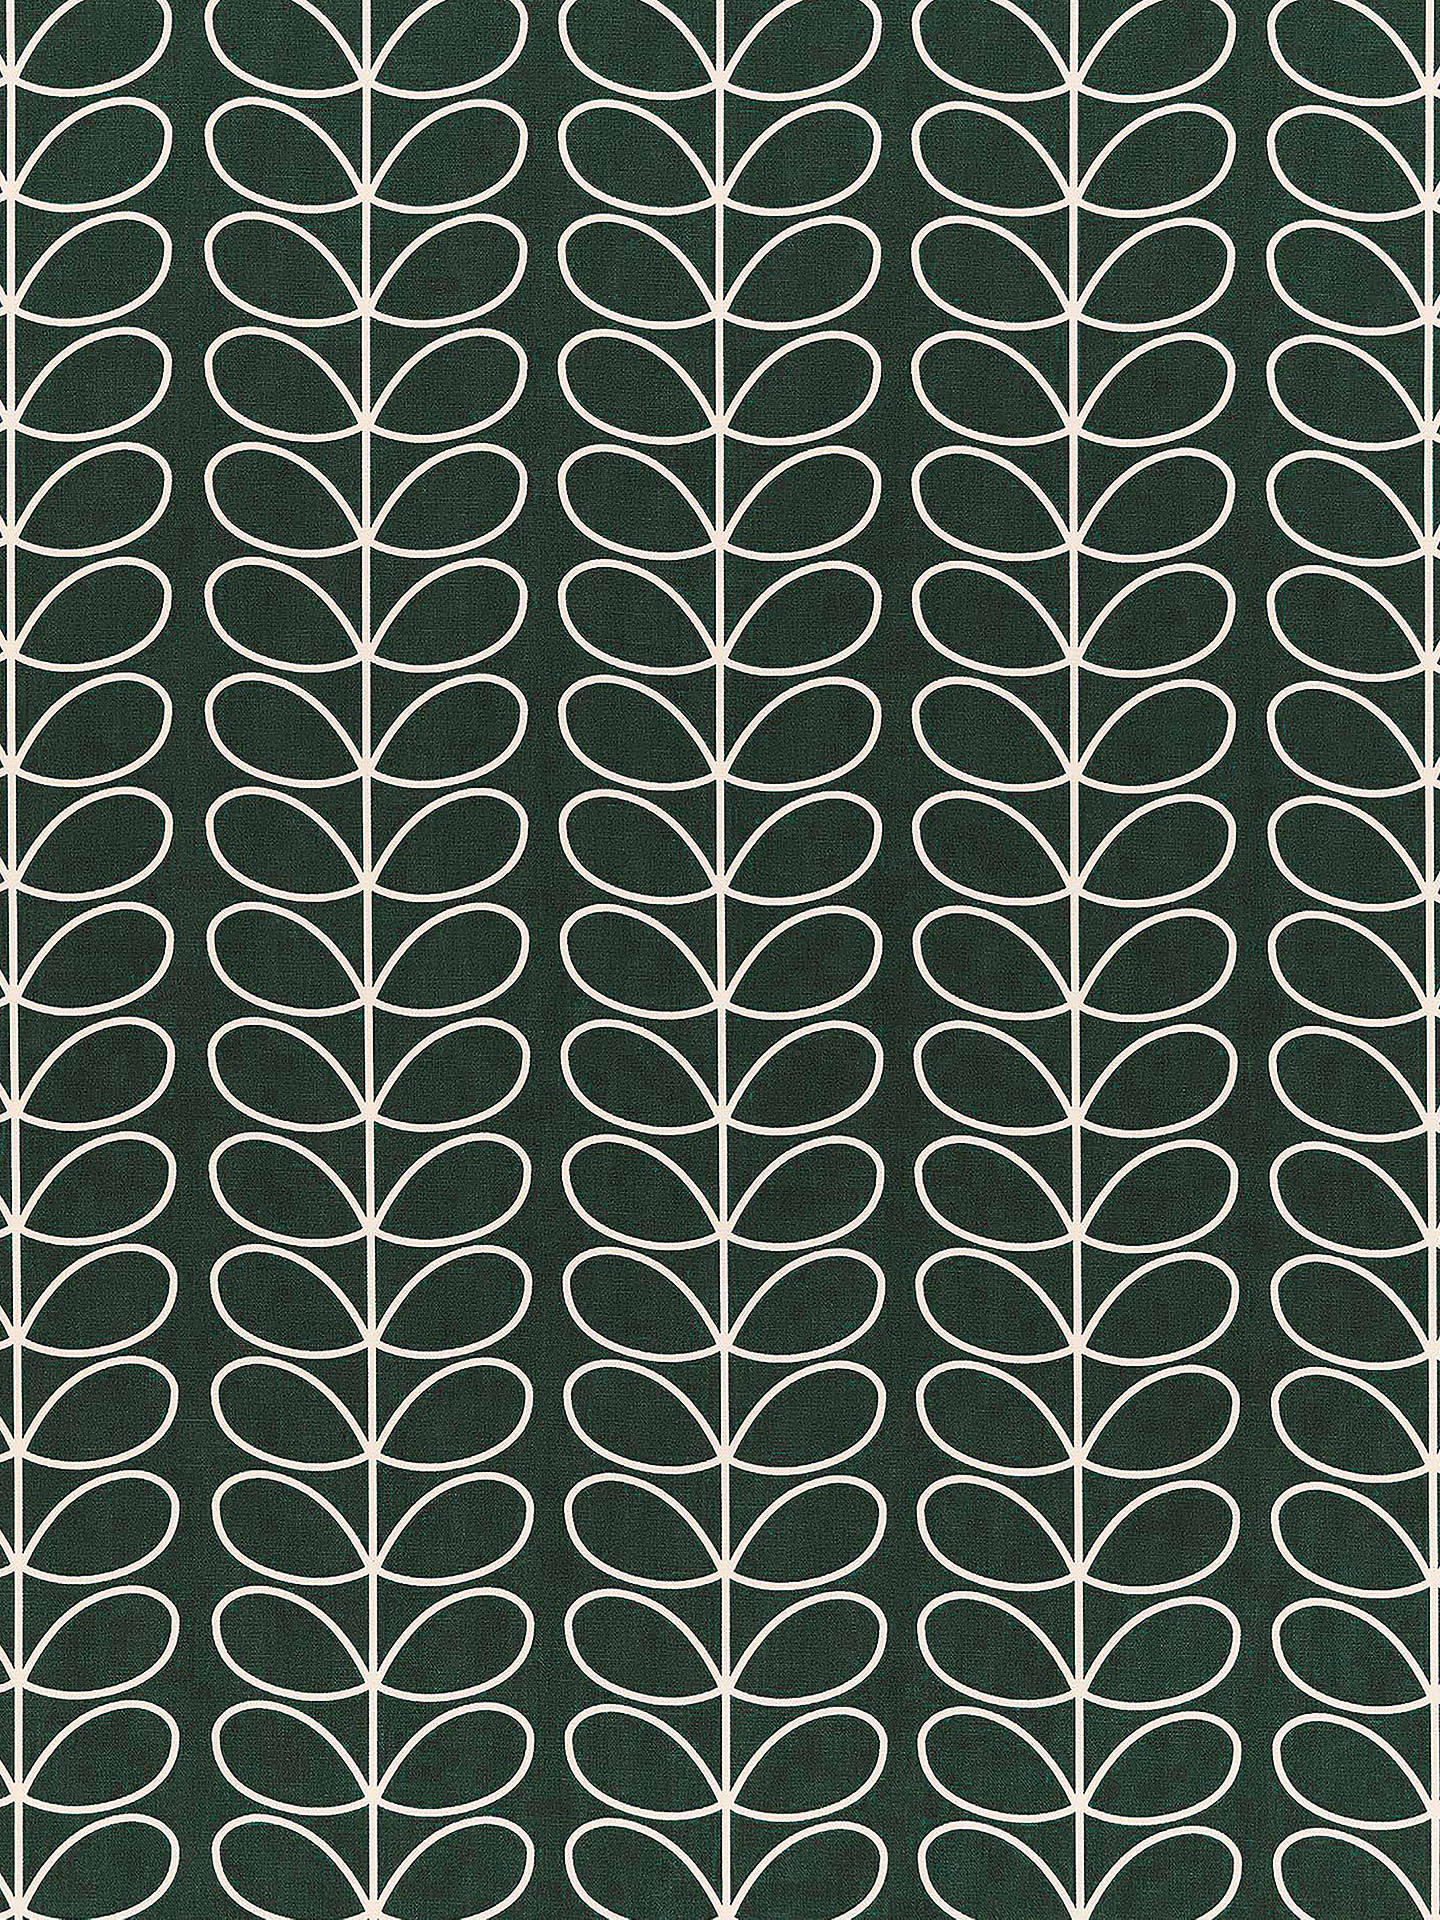 Orla Kiely Linear Stem Made to Measure Curtains, Evergreen